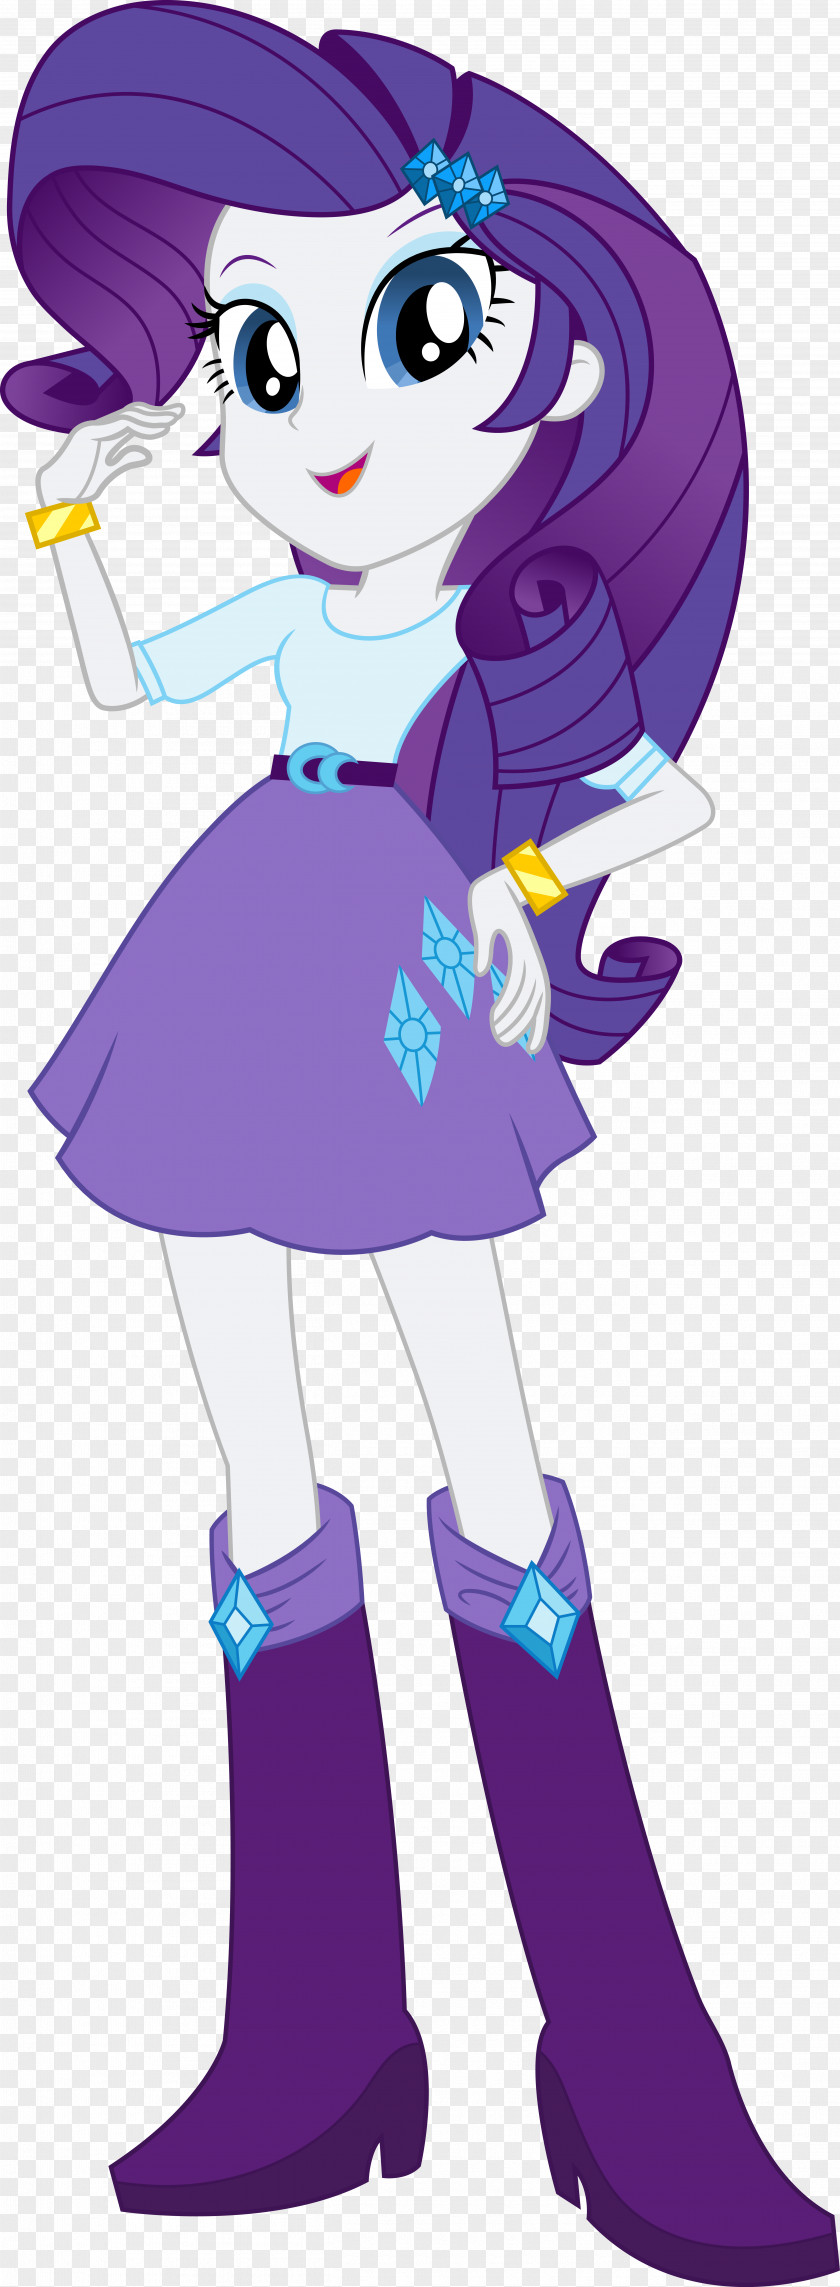 Equestria Girls Fluttershy In Love Rarity Twilight Sparkle My Little Pony: Rainbow Dash PNG